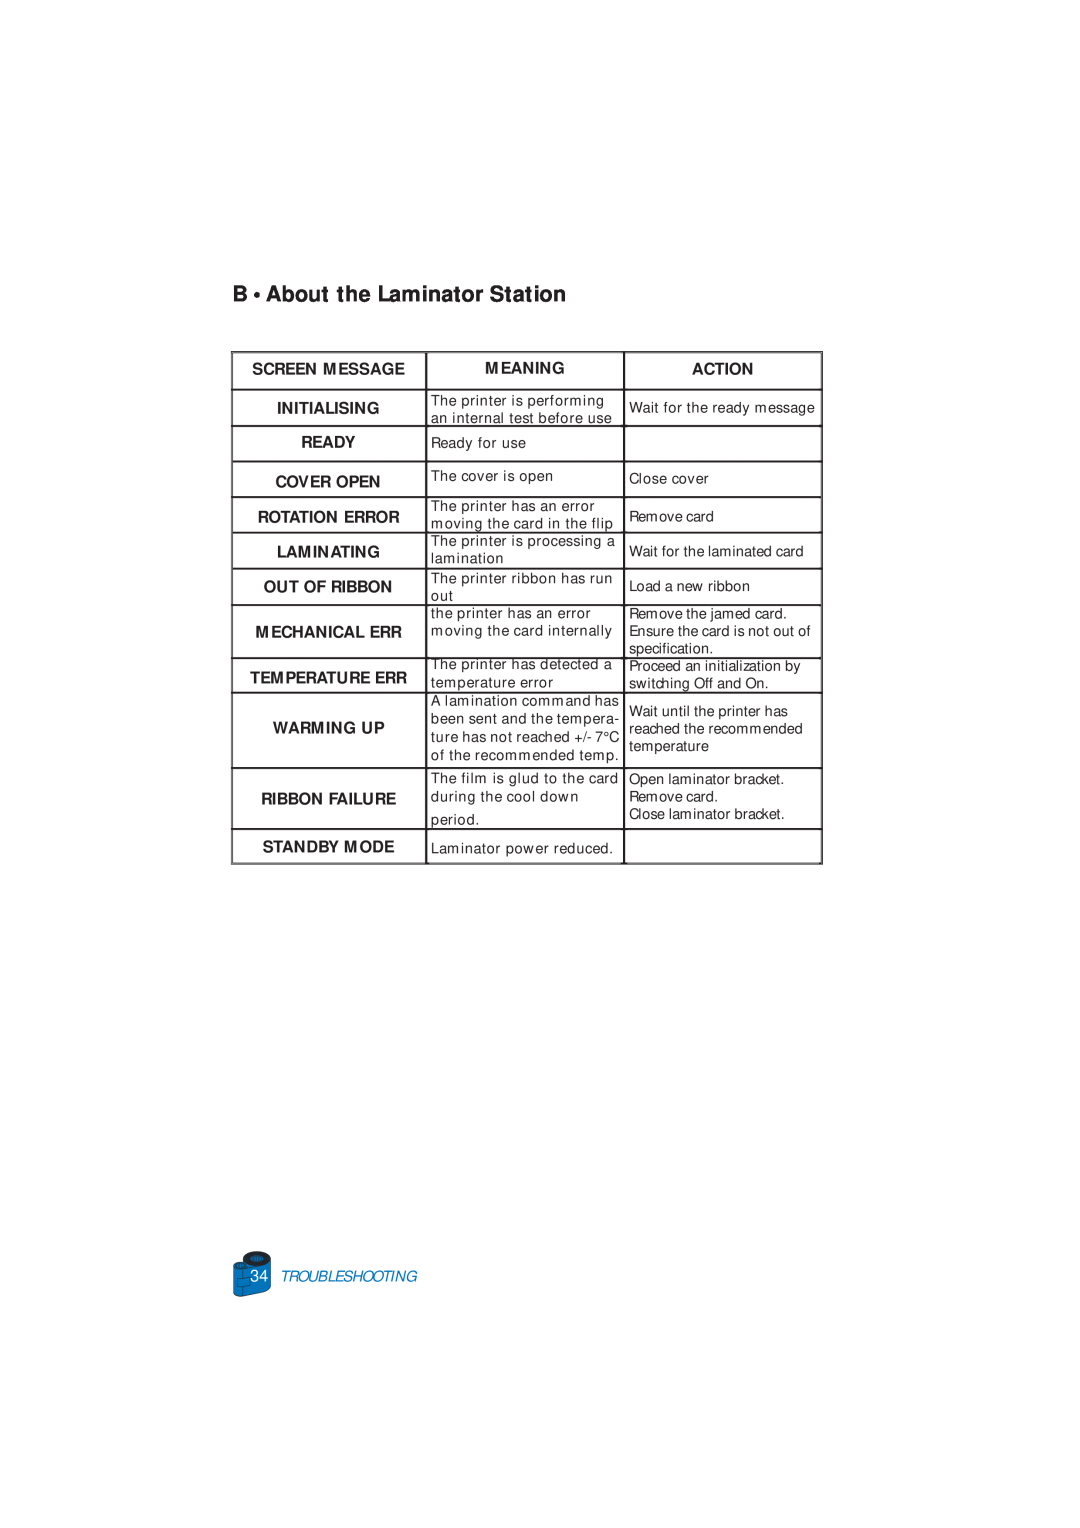 Zebra Technologies P520 user manual B About the Laminator Station, Troubleshooting 